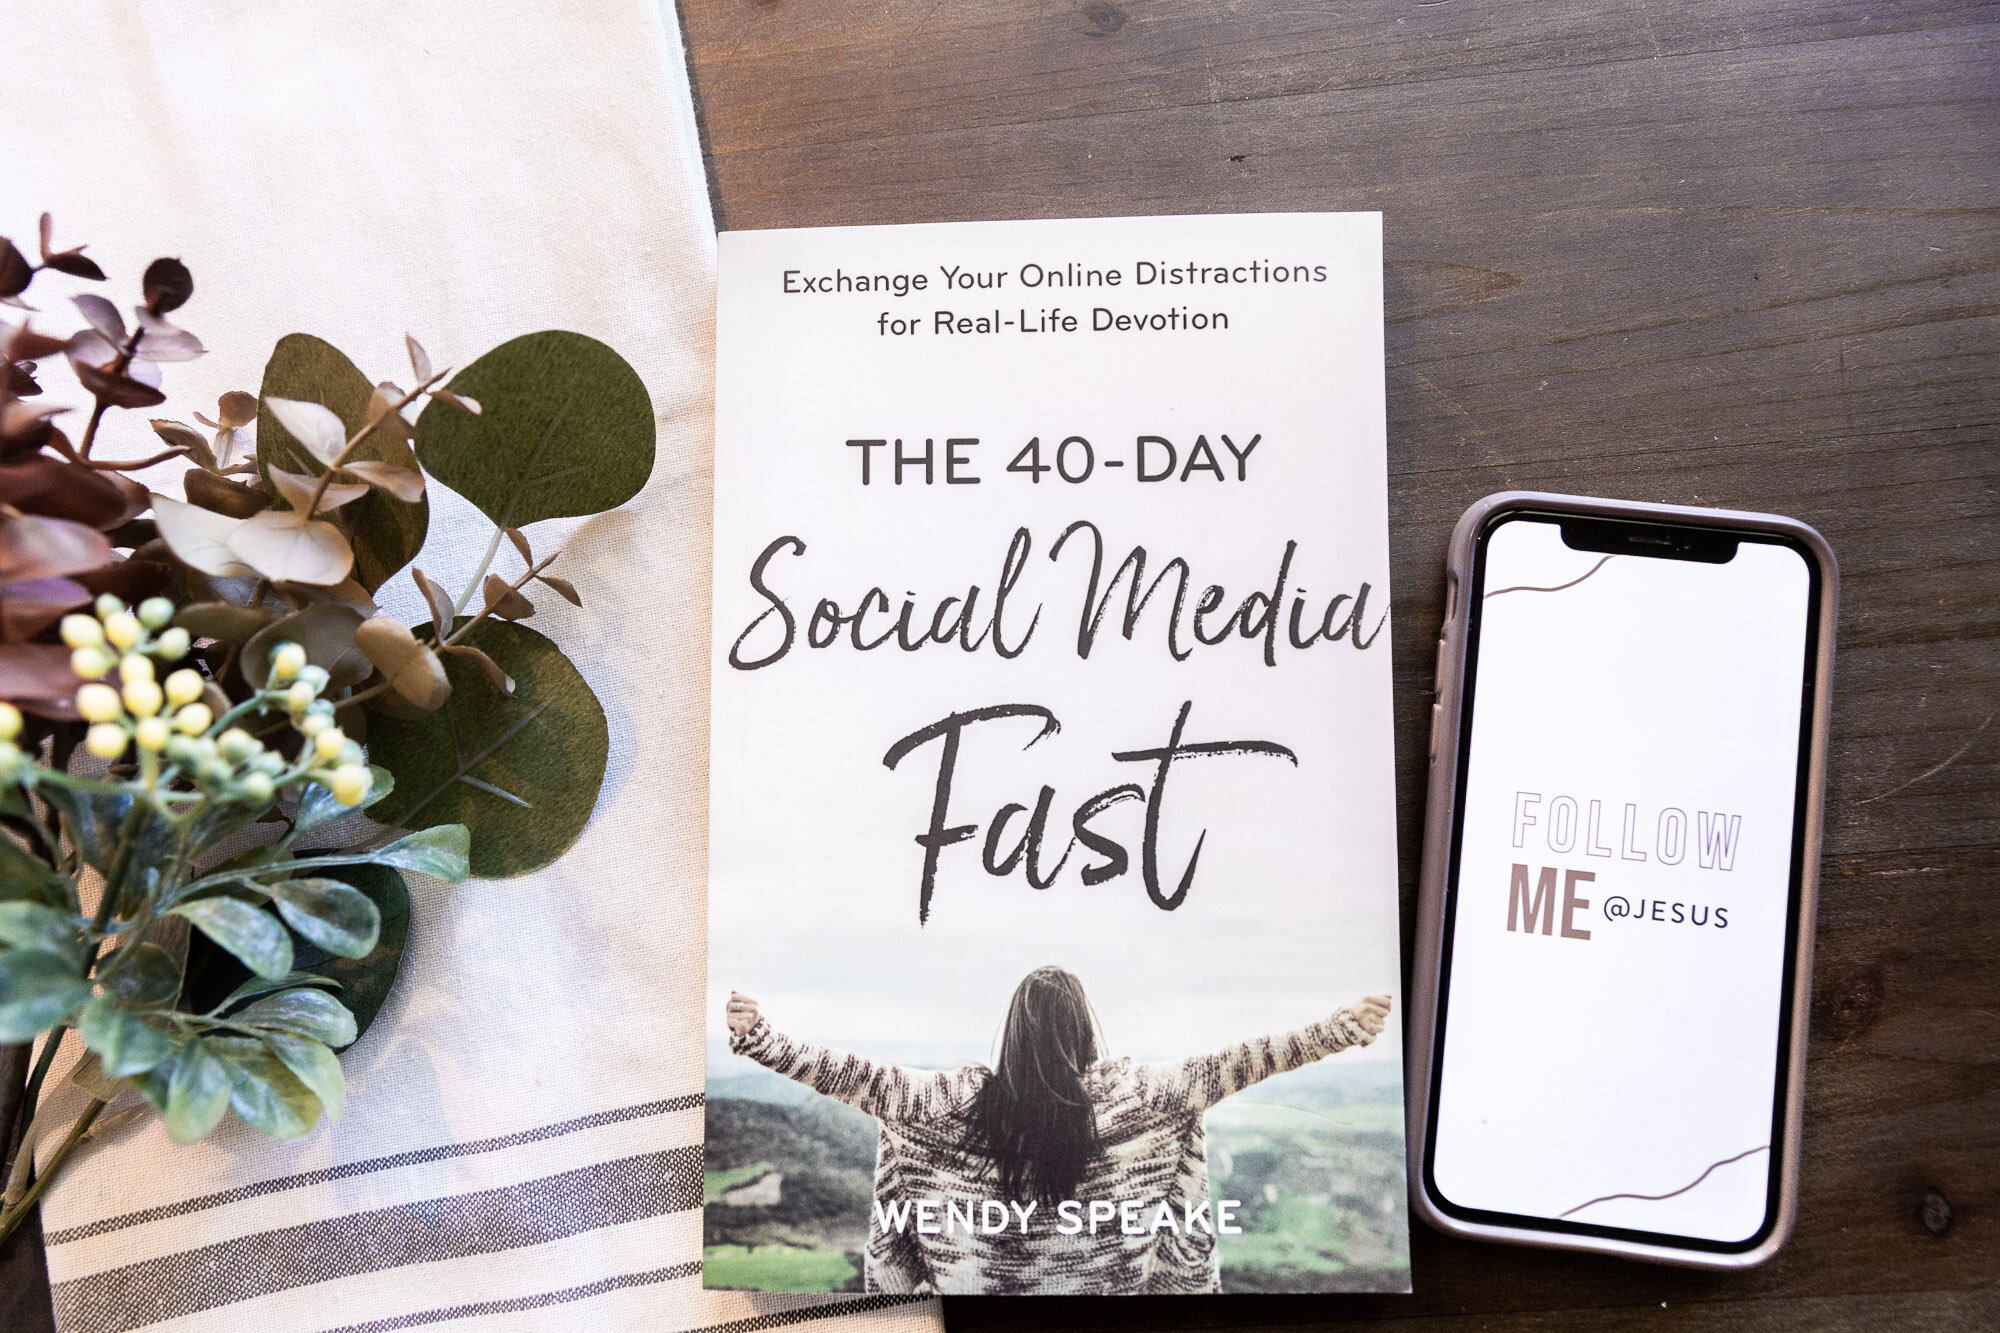 ORDER THE 40-DAY SOCIAL MEDIA FAST BOOK